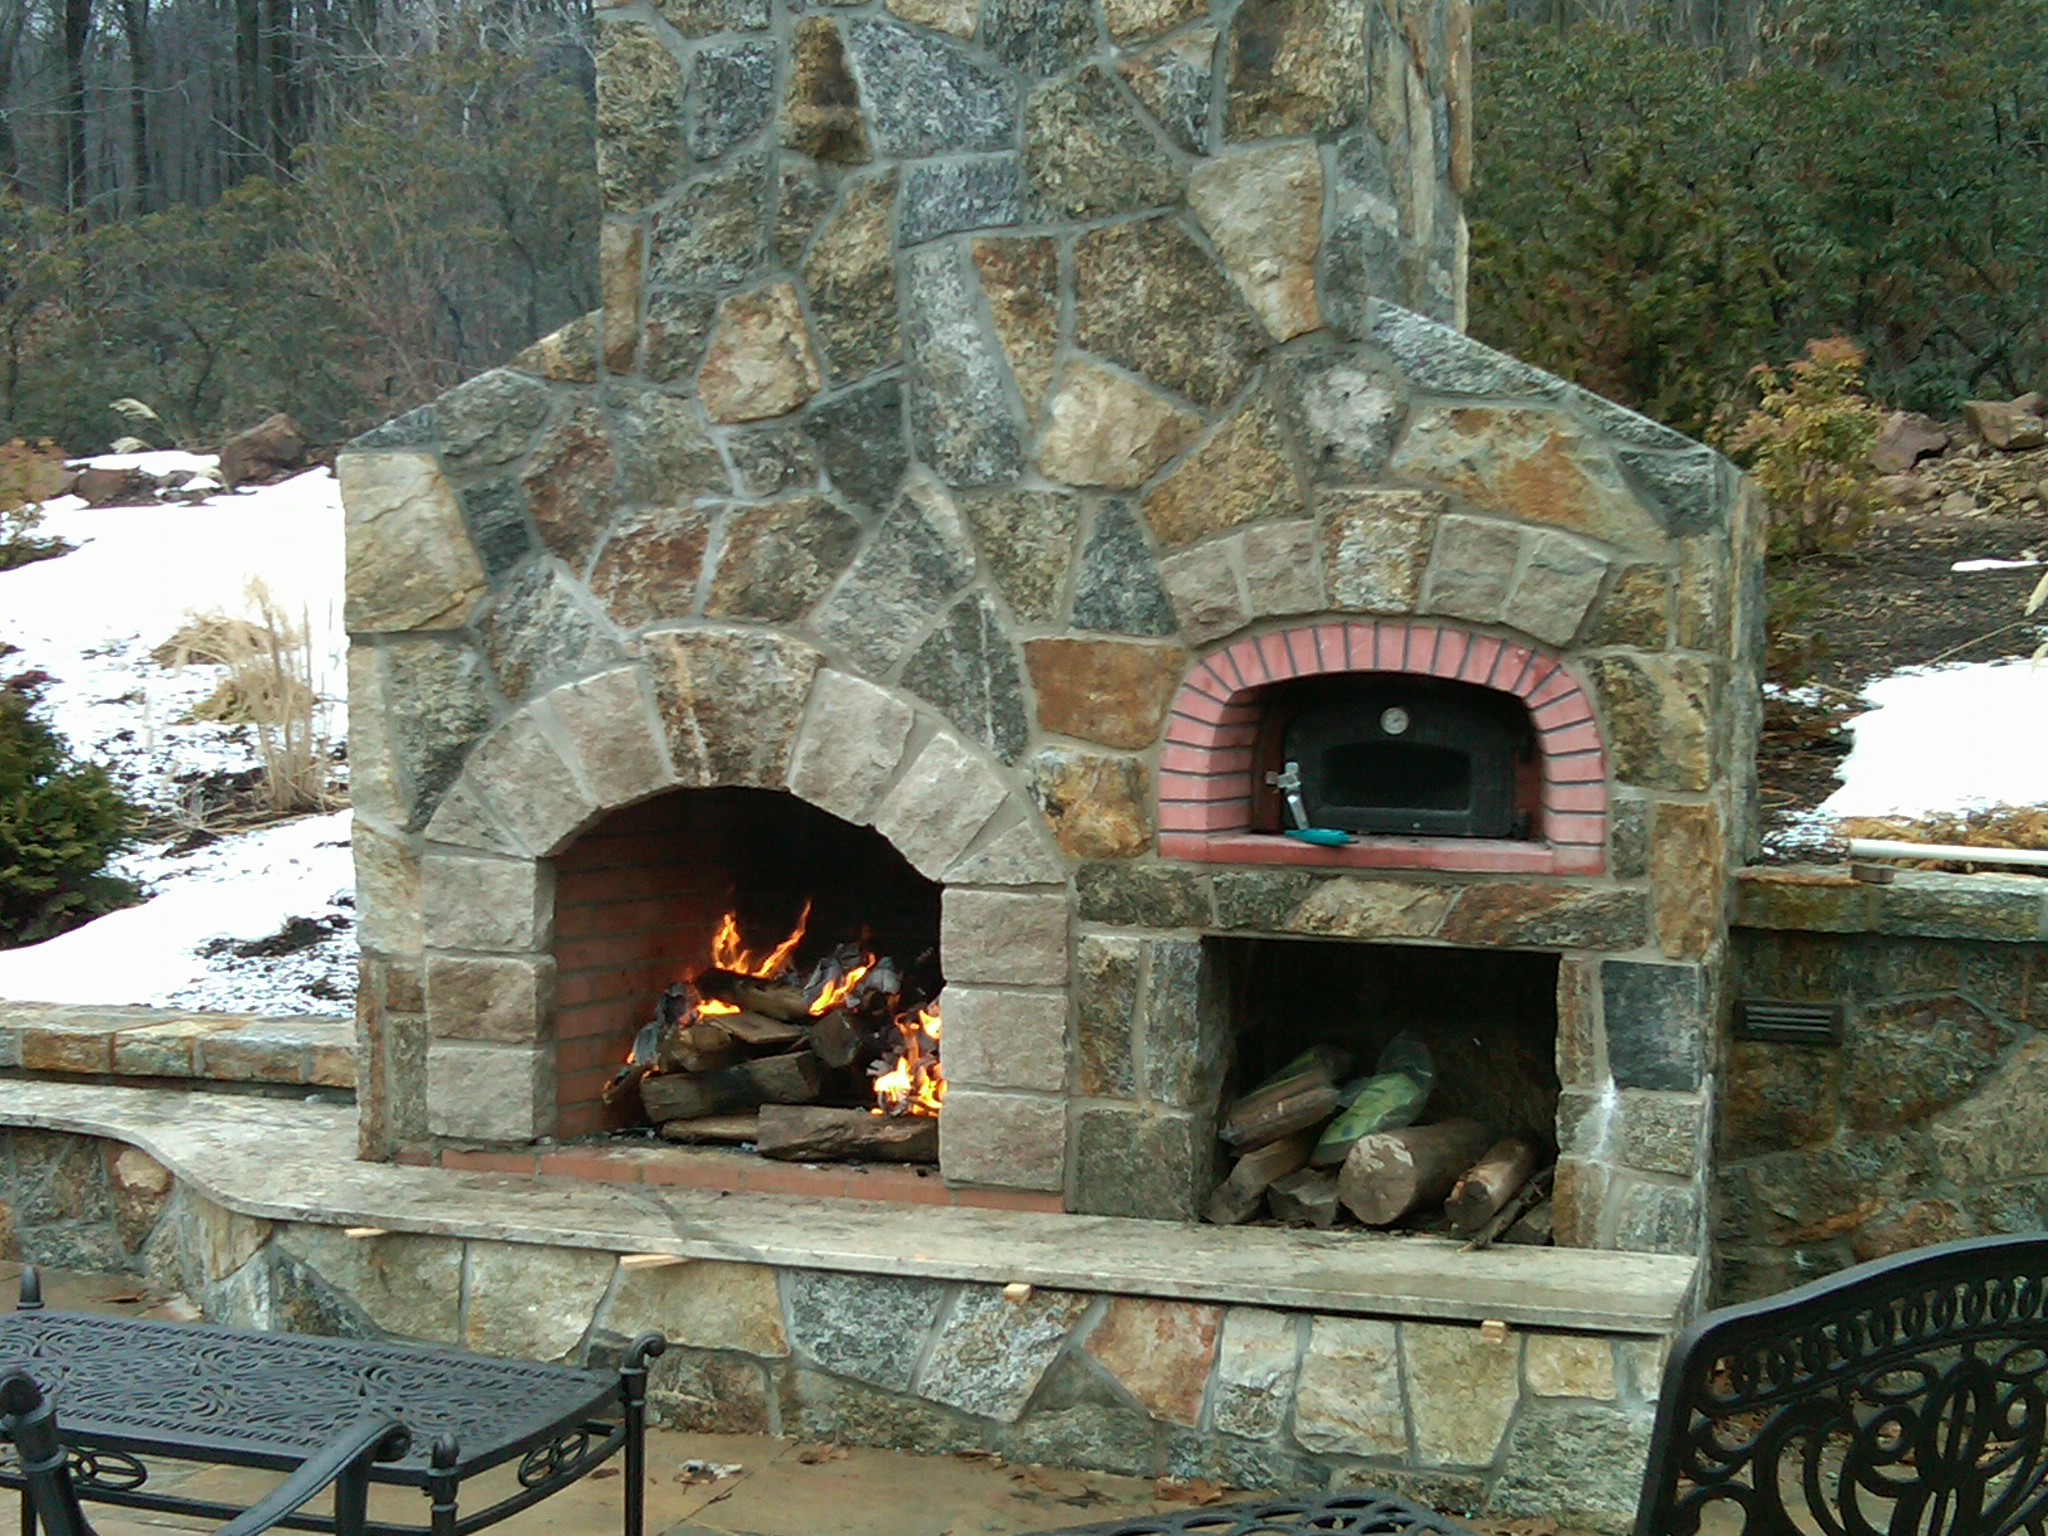 Outdoor Pizza Ovens 61